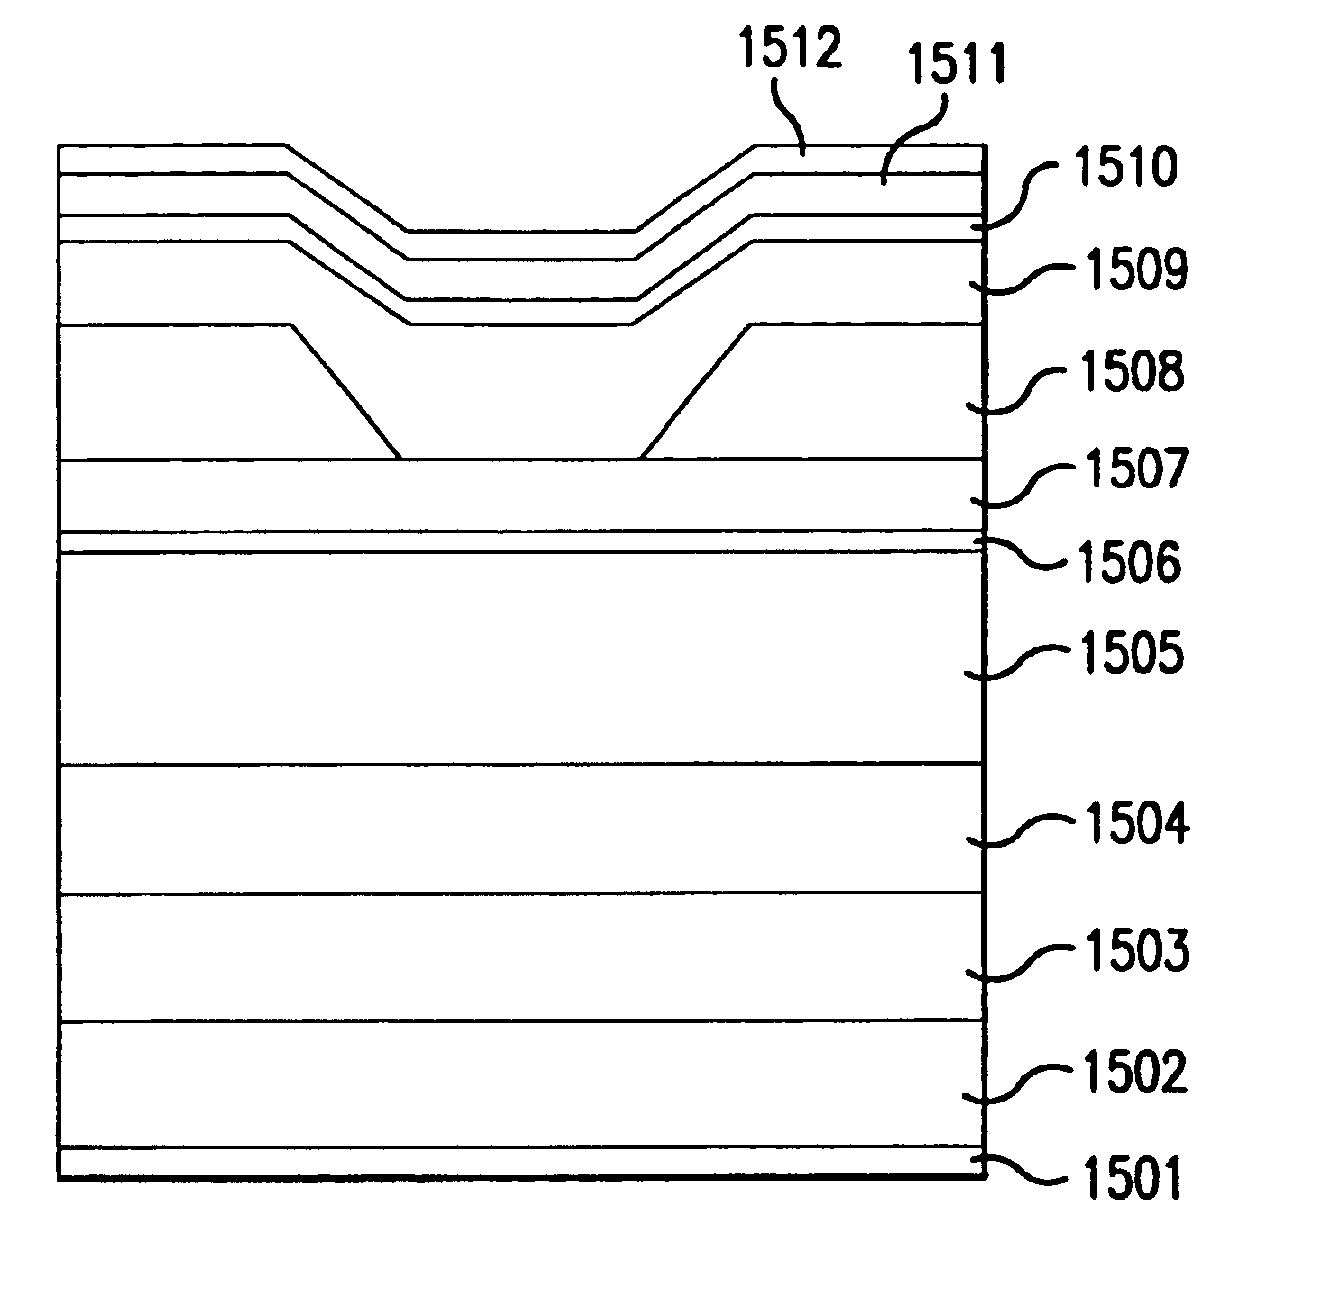 Laser diode and semiconductor light-emitting device producing visible-wavelength radiation